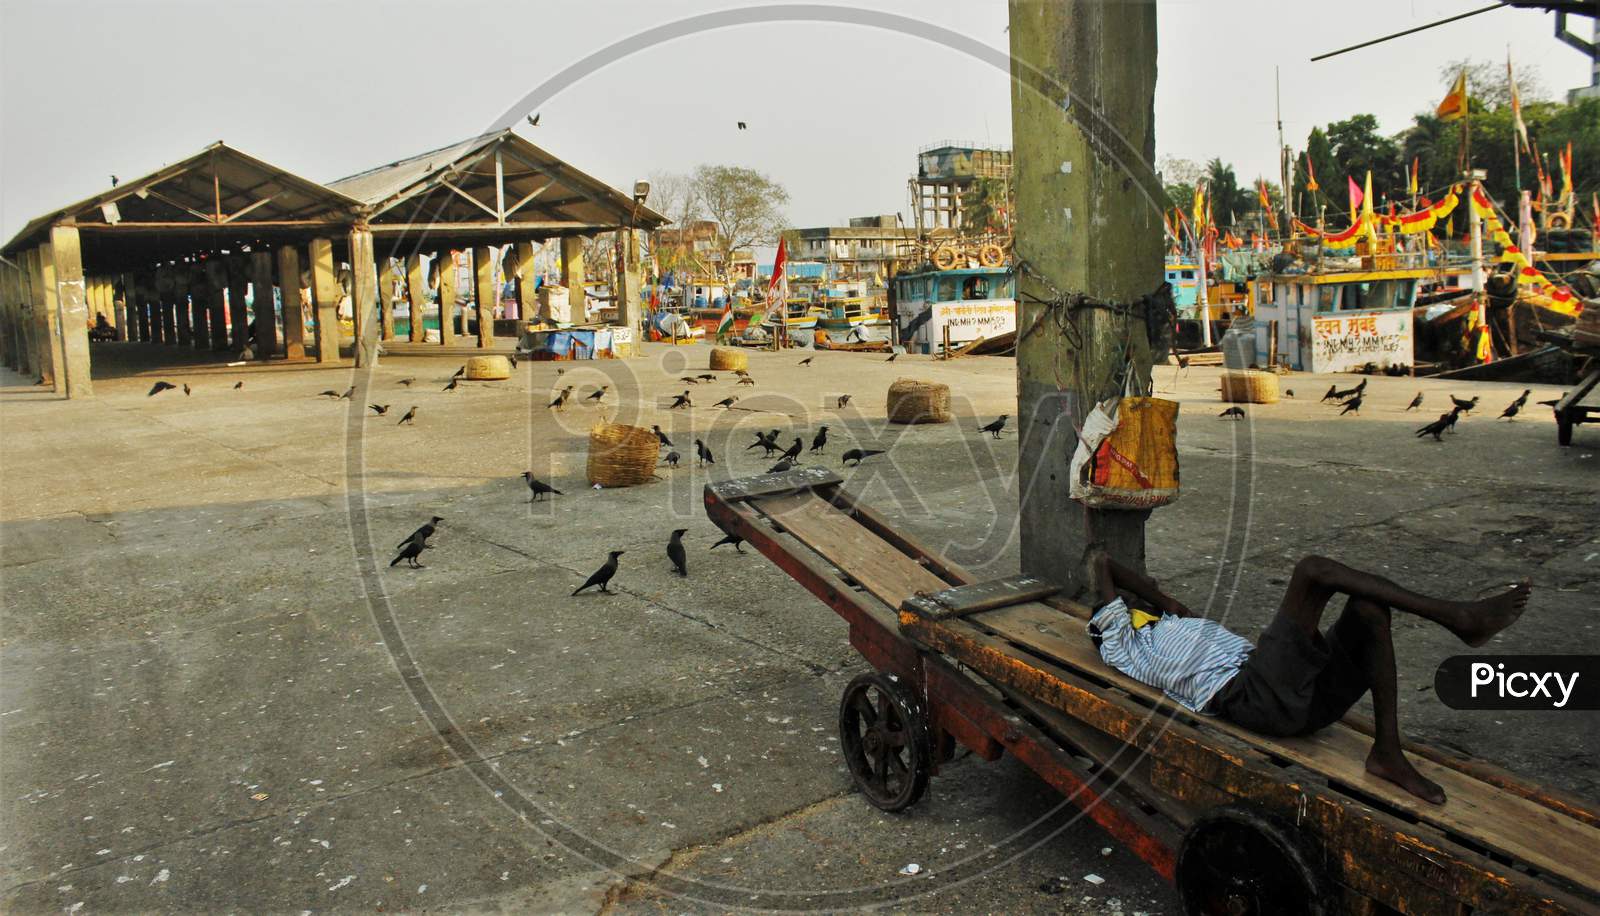 A man is seen sleeping on the cart at the deserted Sassoon Docks(Fish market) after the extension of the 21- day nationwide lockdown to limit the spreading of coronavirus disease (COVID-19) in Mumbai, India, on April 15, 2020.